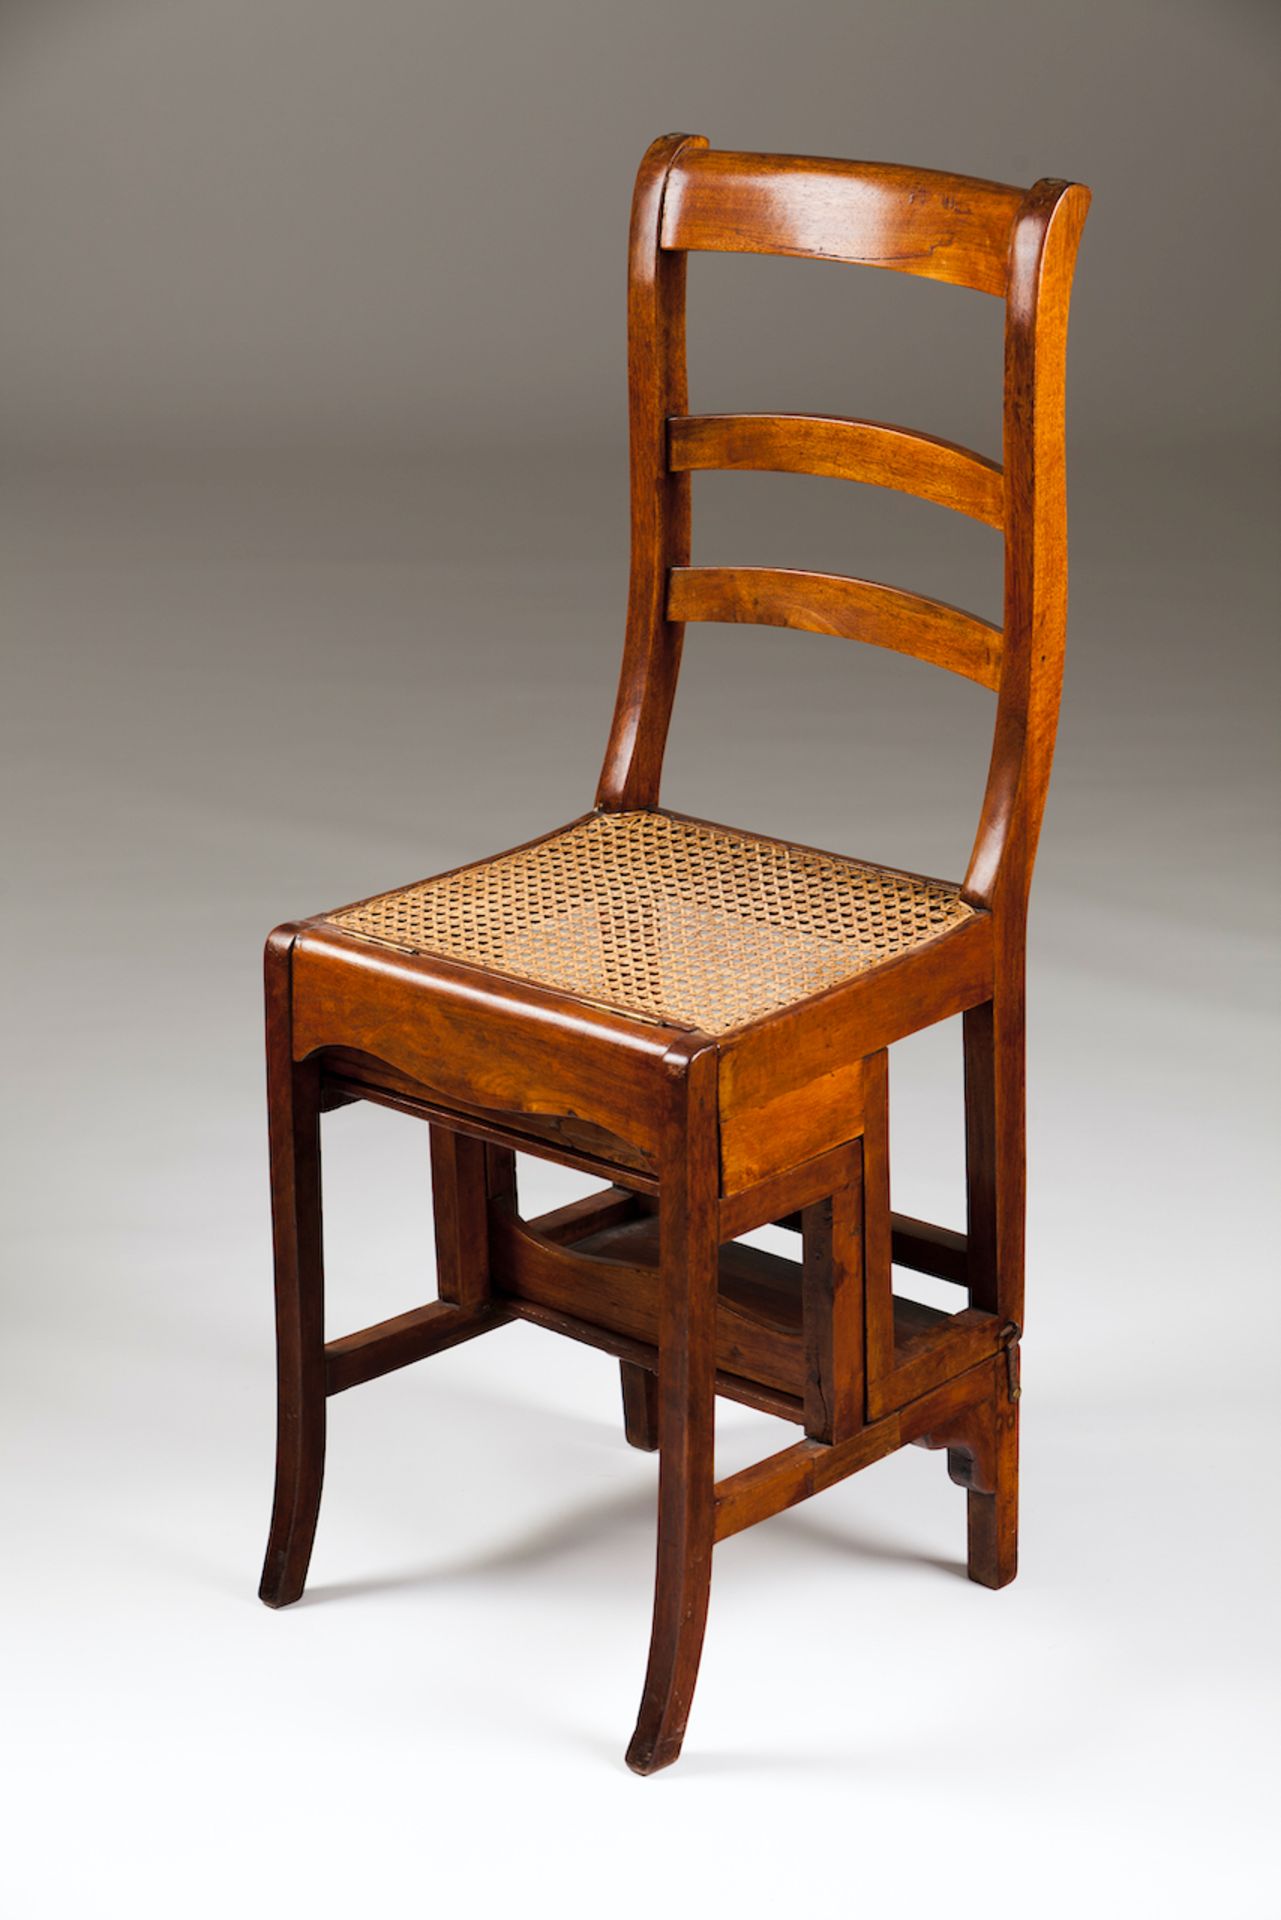 A library chair/ladderMahoganyCanned seat20th centuryHeight: 99 cm (chair)81,5 cm (ladder)